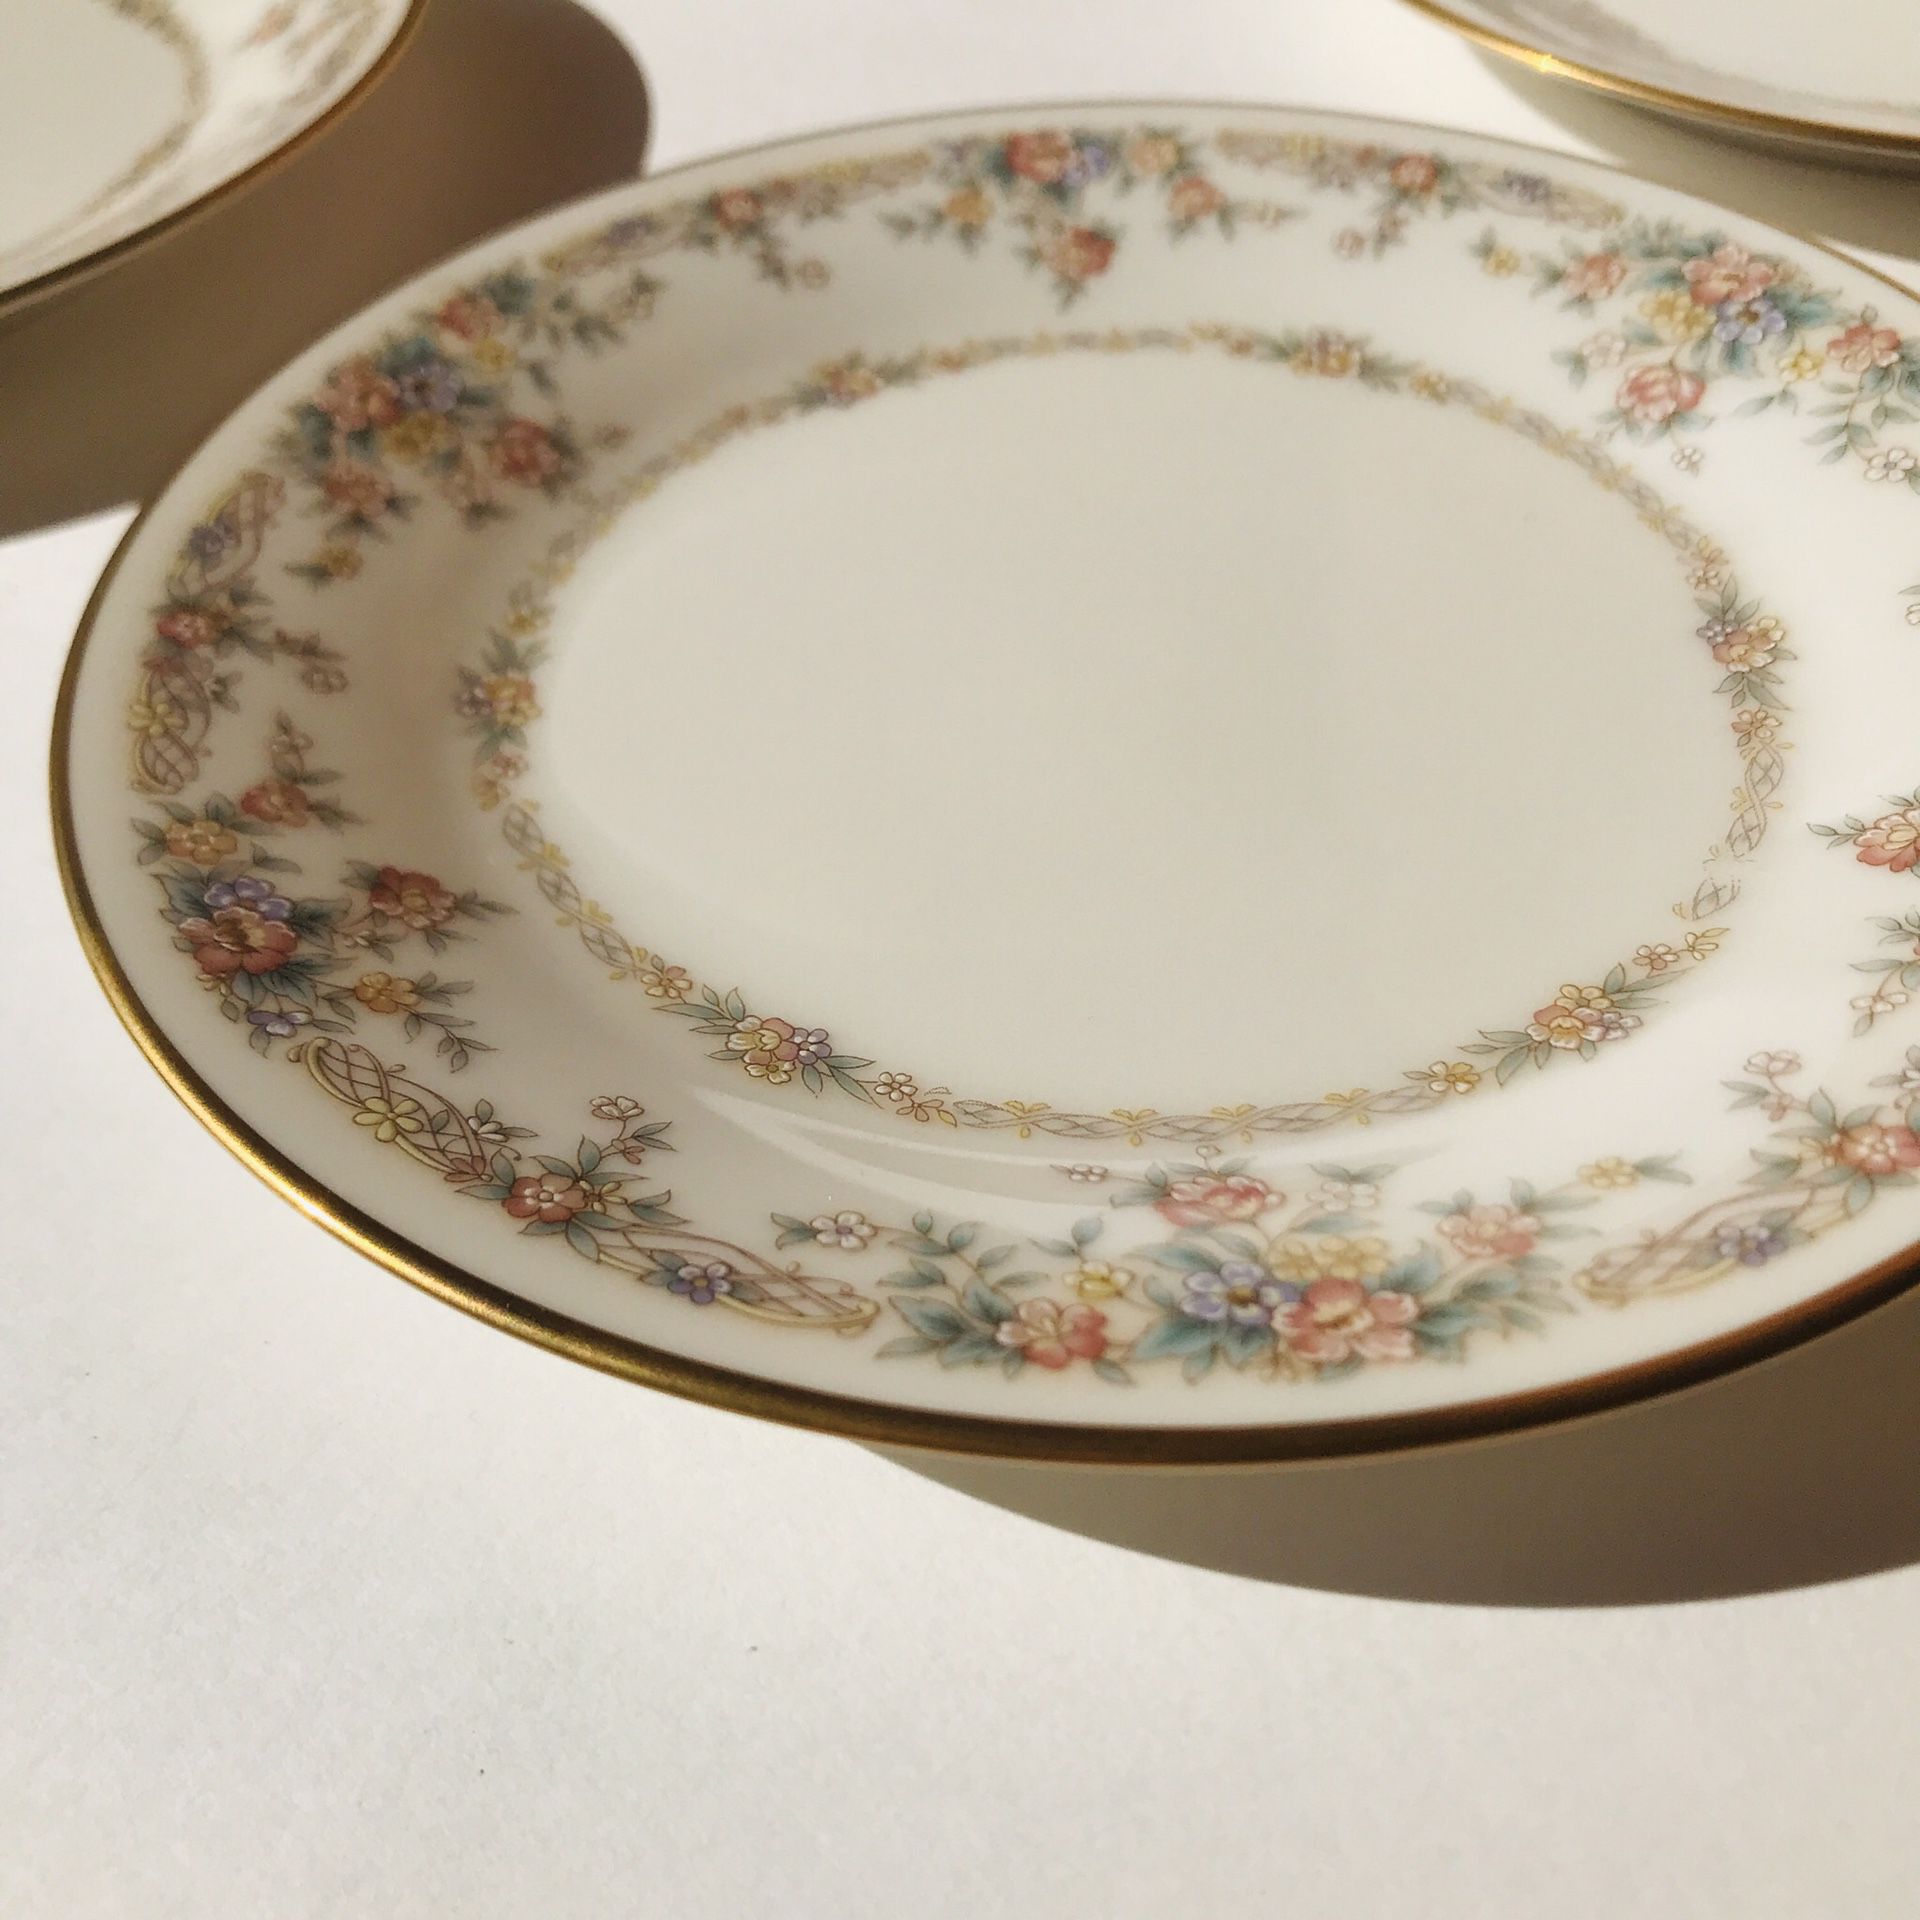 Set of 4 - Noritake Ivory China 7246 Bread and Butter Place